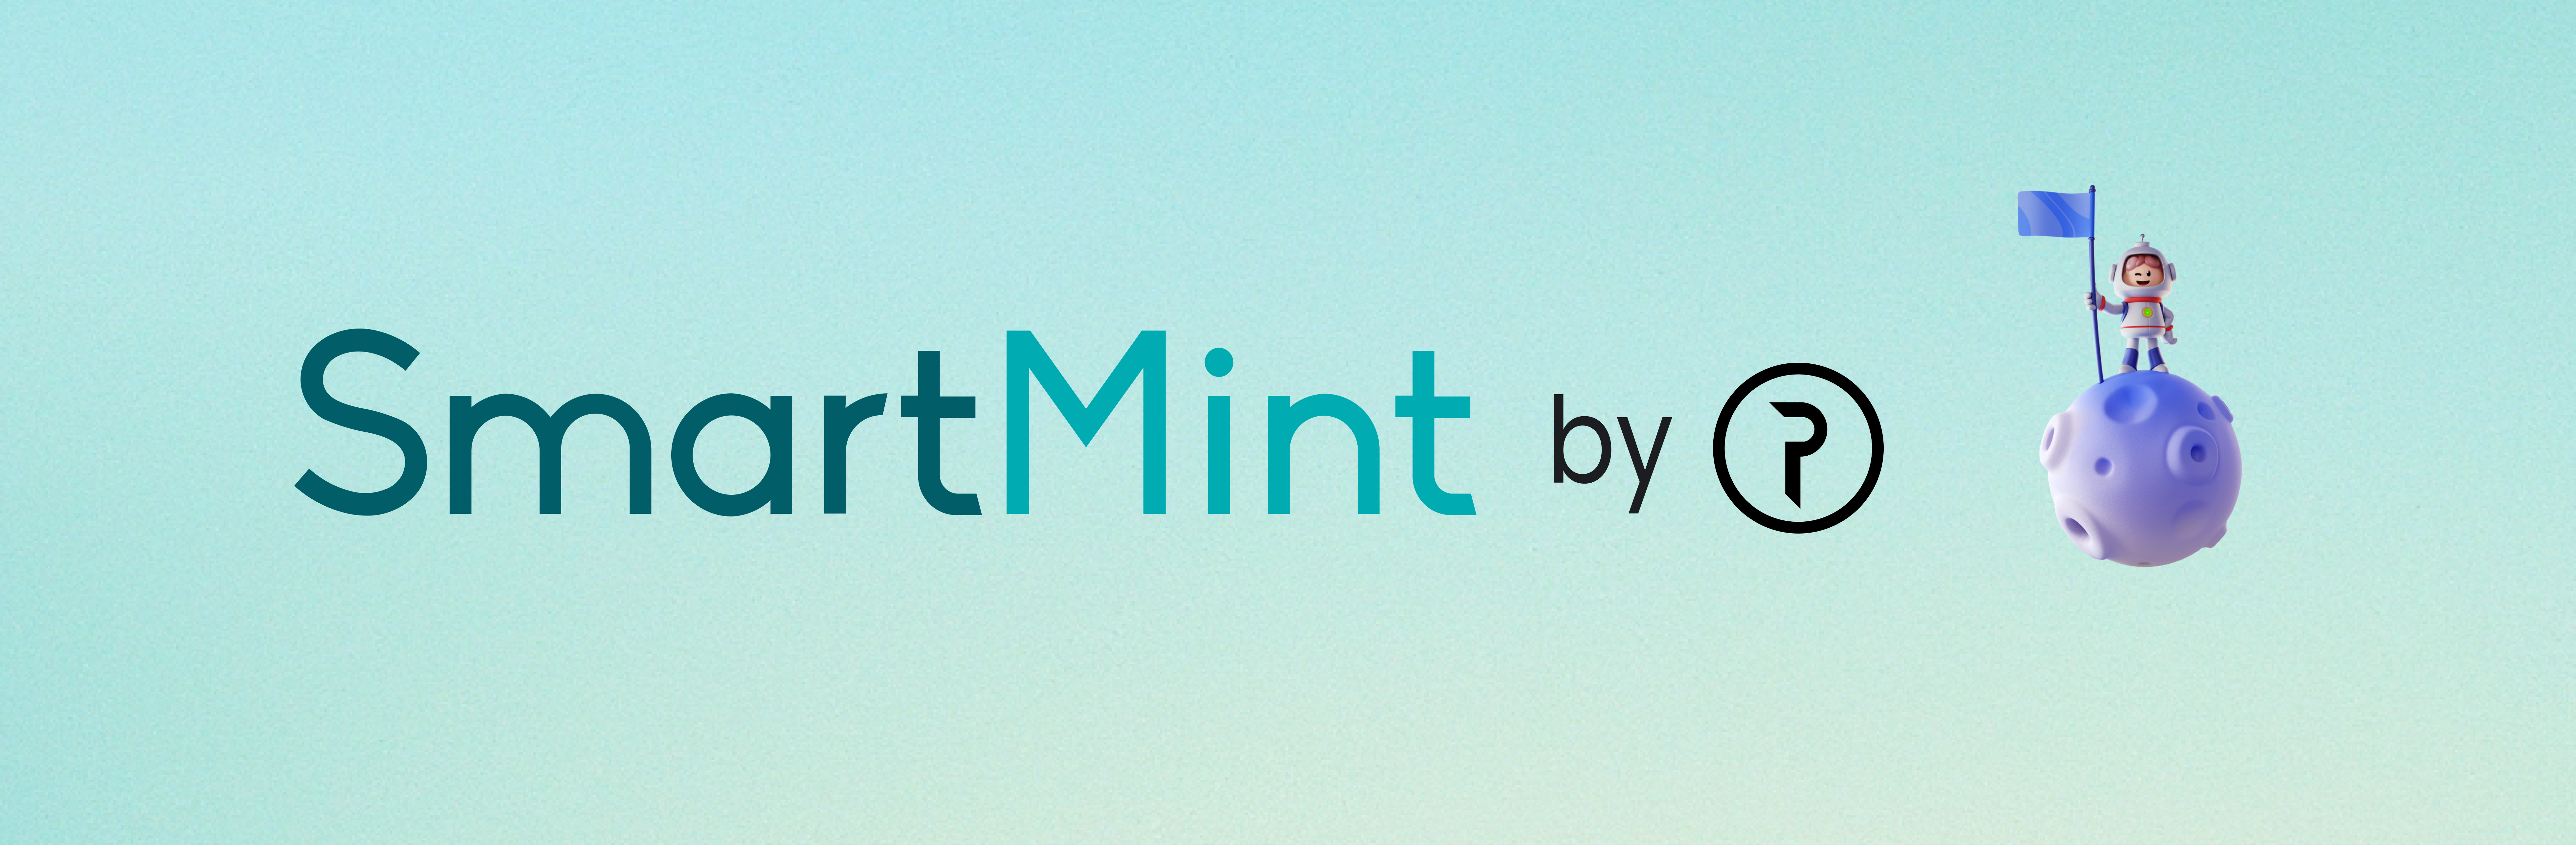 Introducing SmartMint’s Dedicated Twitter Account for Creators and Collectors